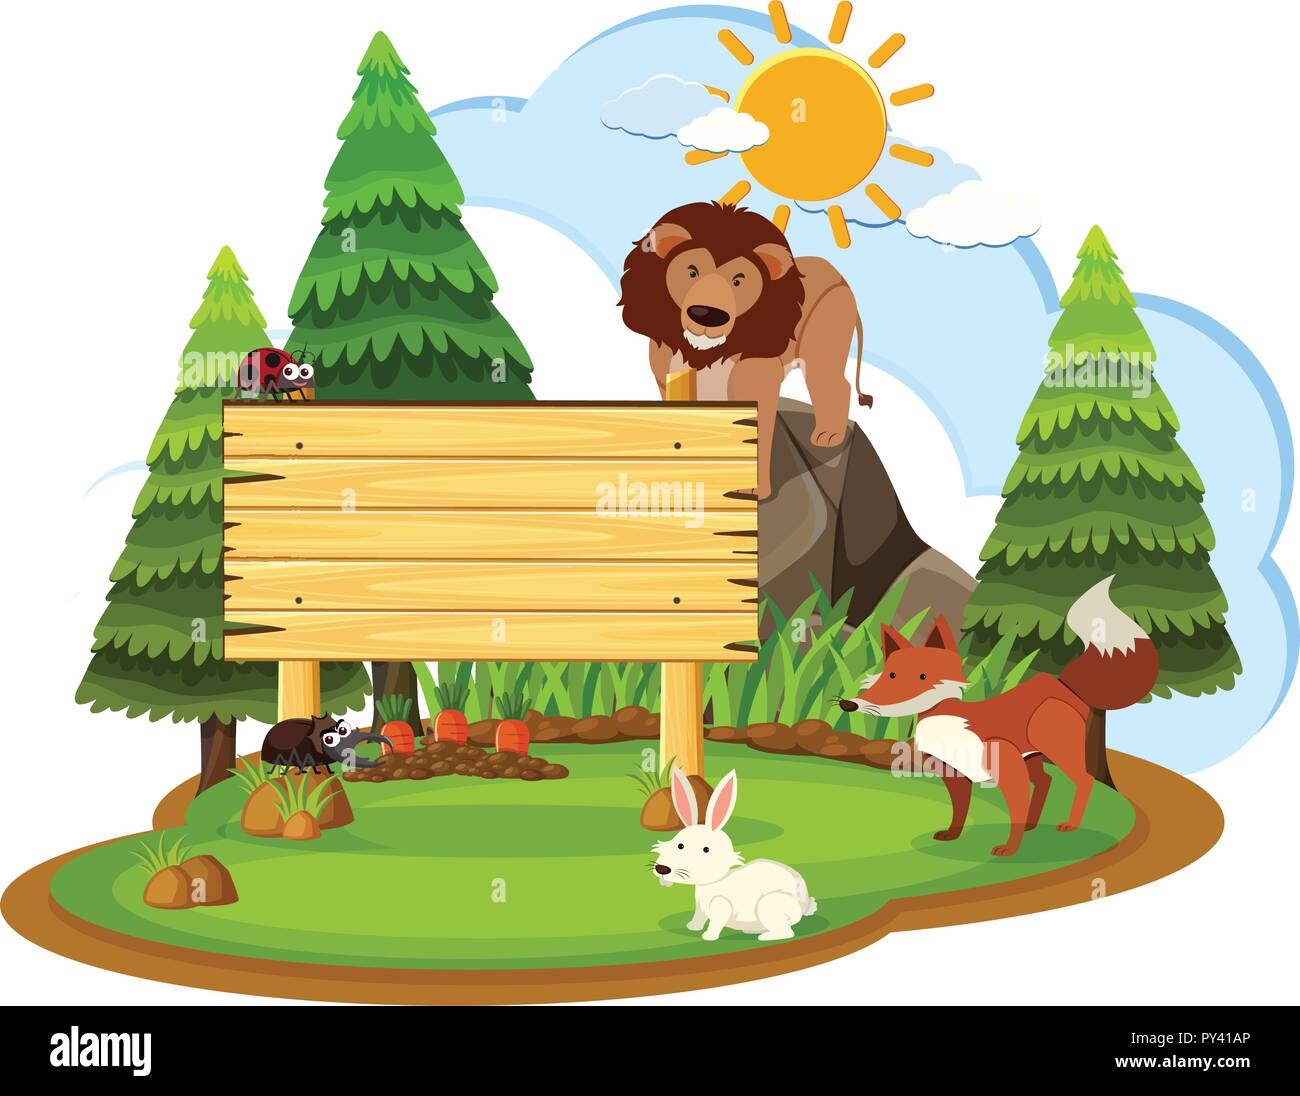 Wooden sign with wild animals illustration Stock Vector